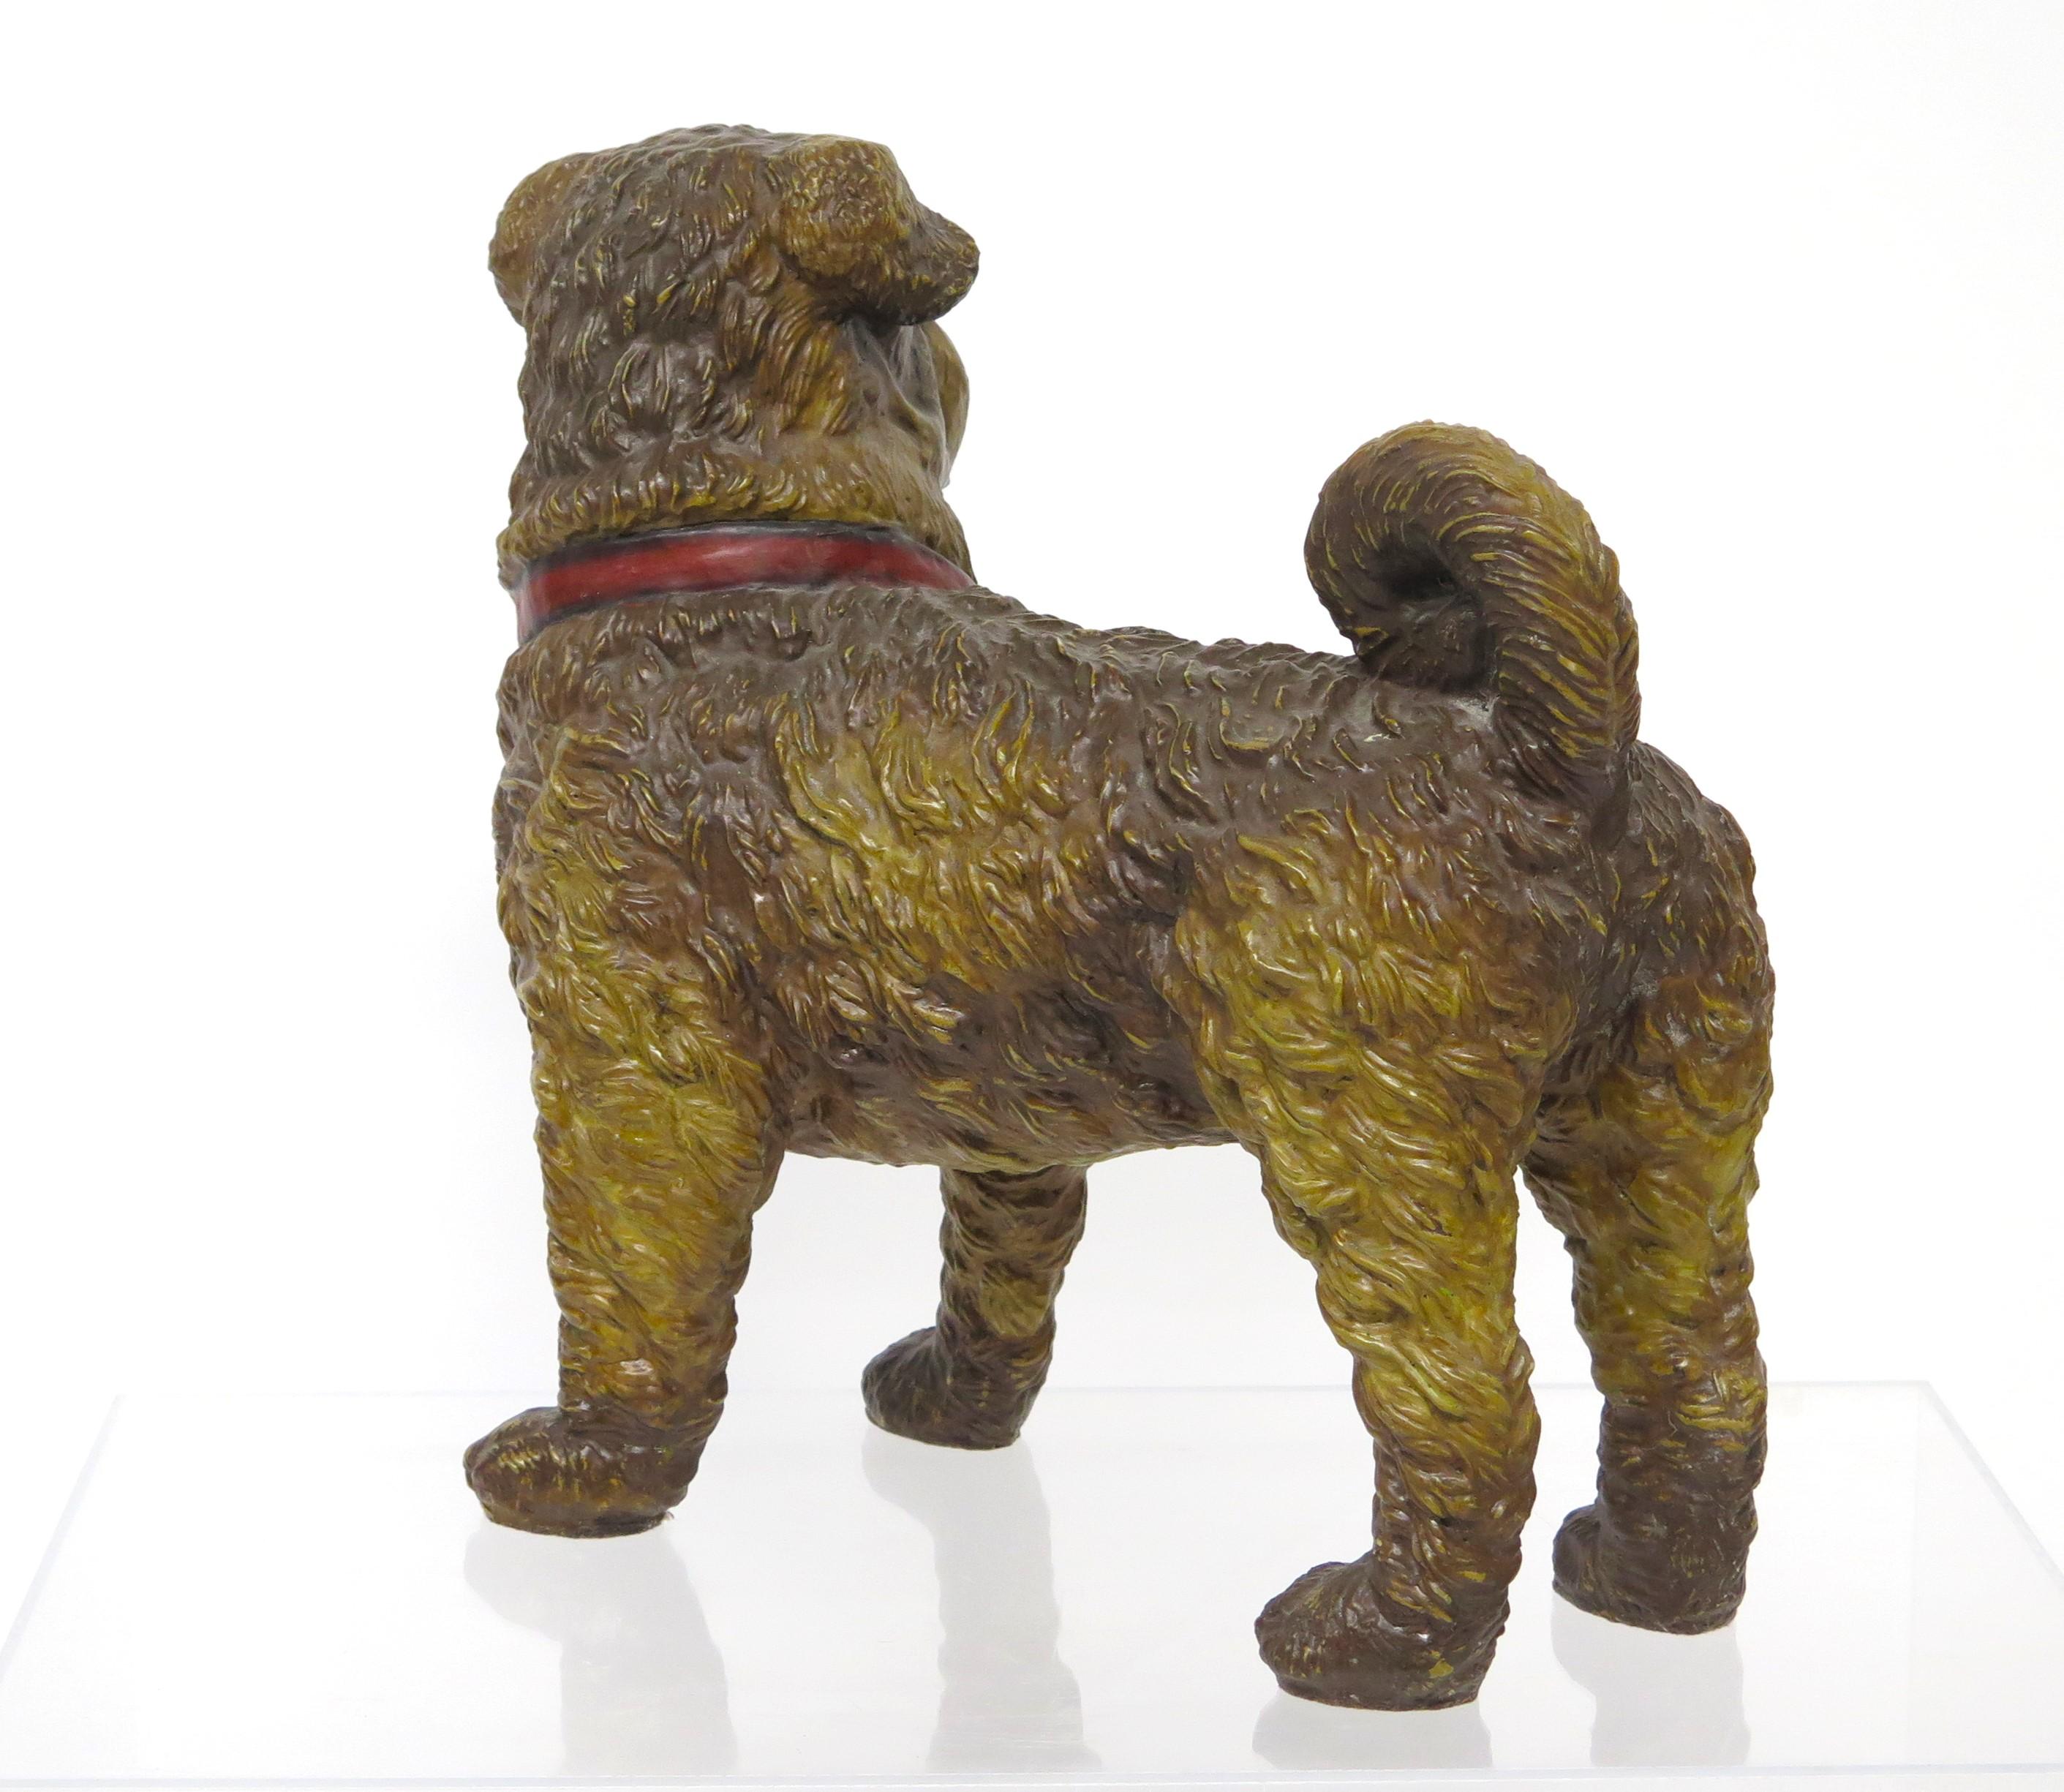 Fired An English Composition Standing Dog Sculpture For Sale